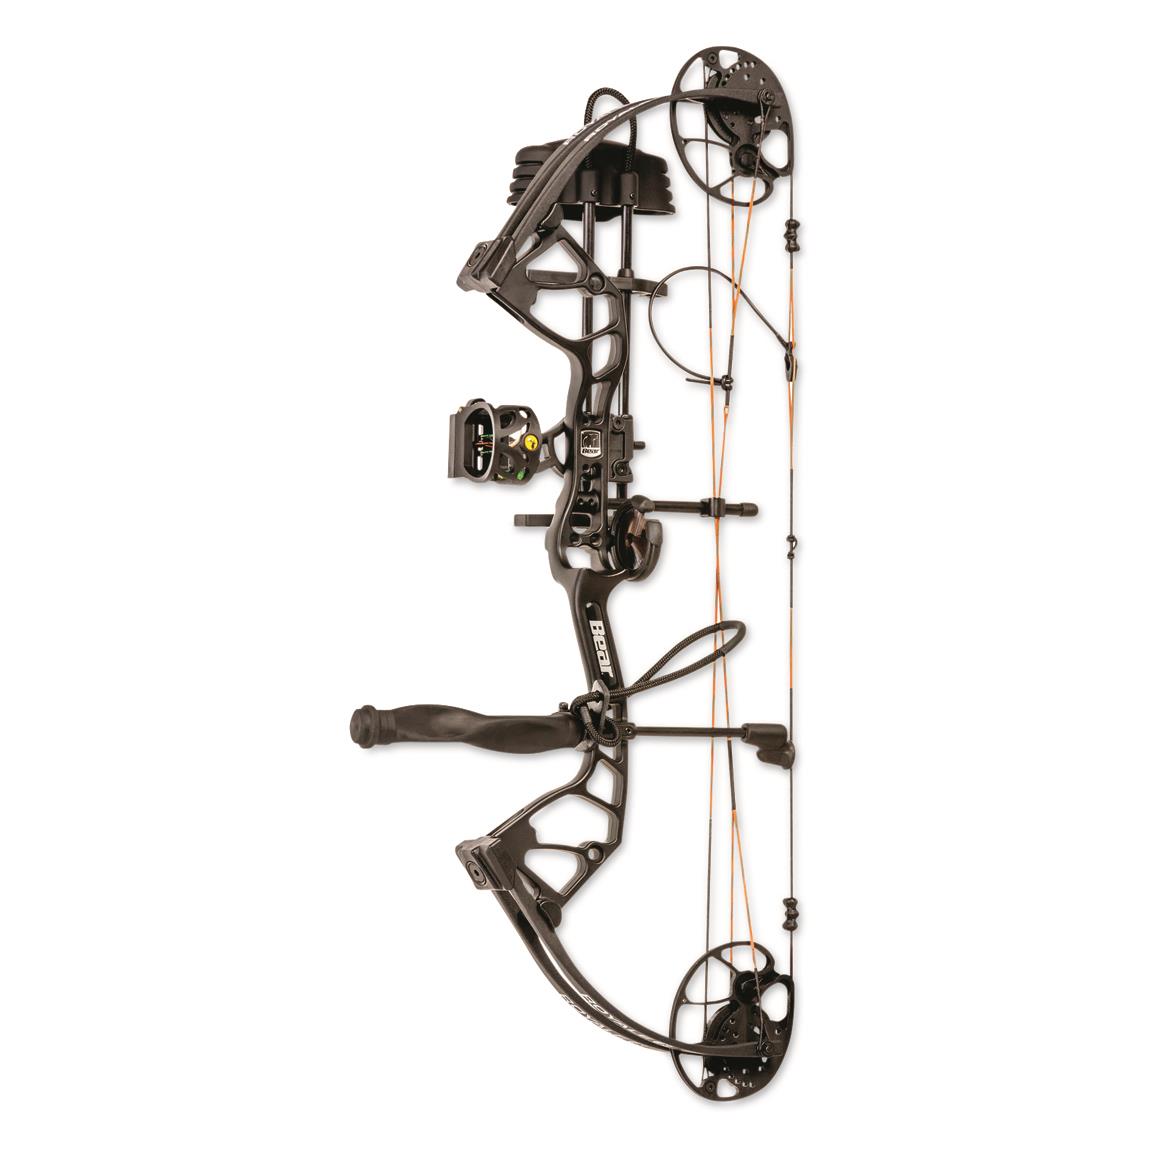 Bear Archery Royale Ready-to-Hunt Extra Compound Bow Package, 5-50 lbs.